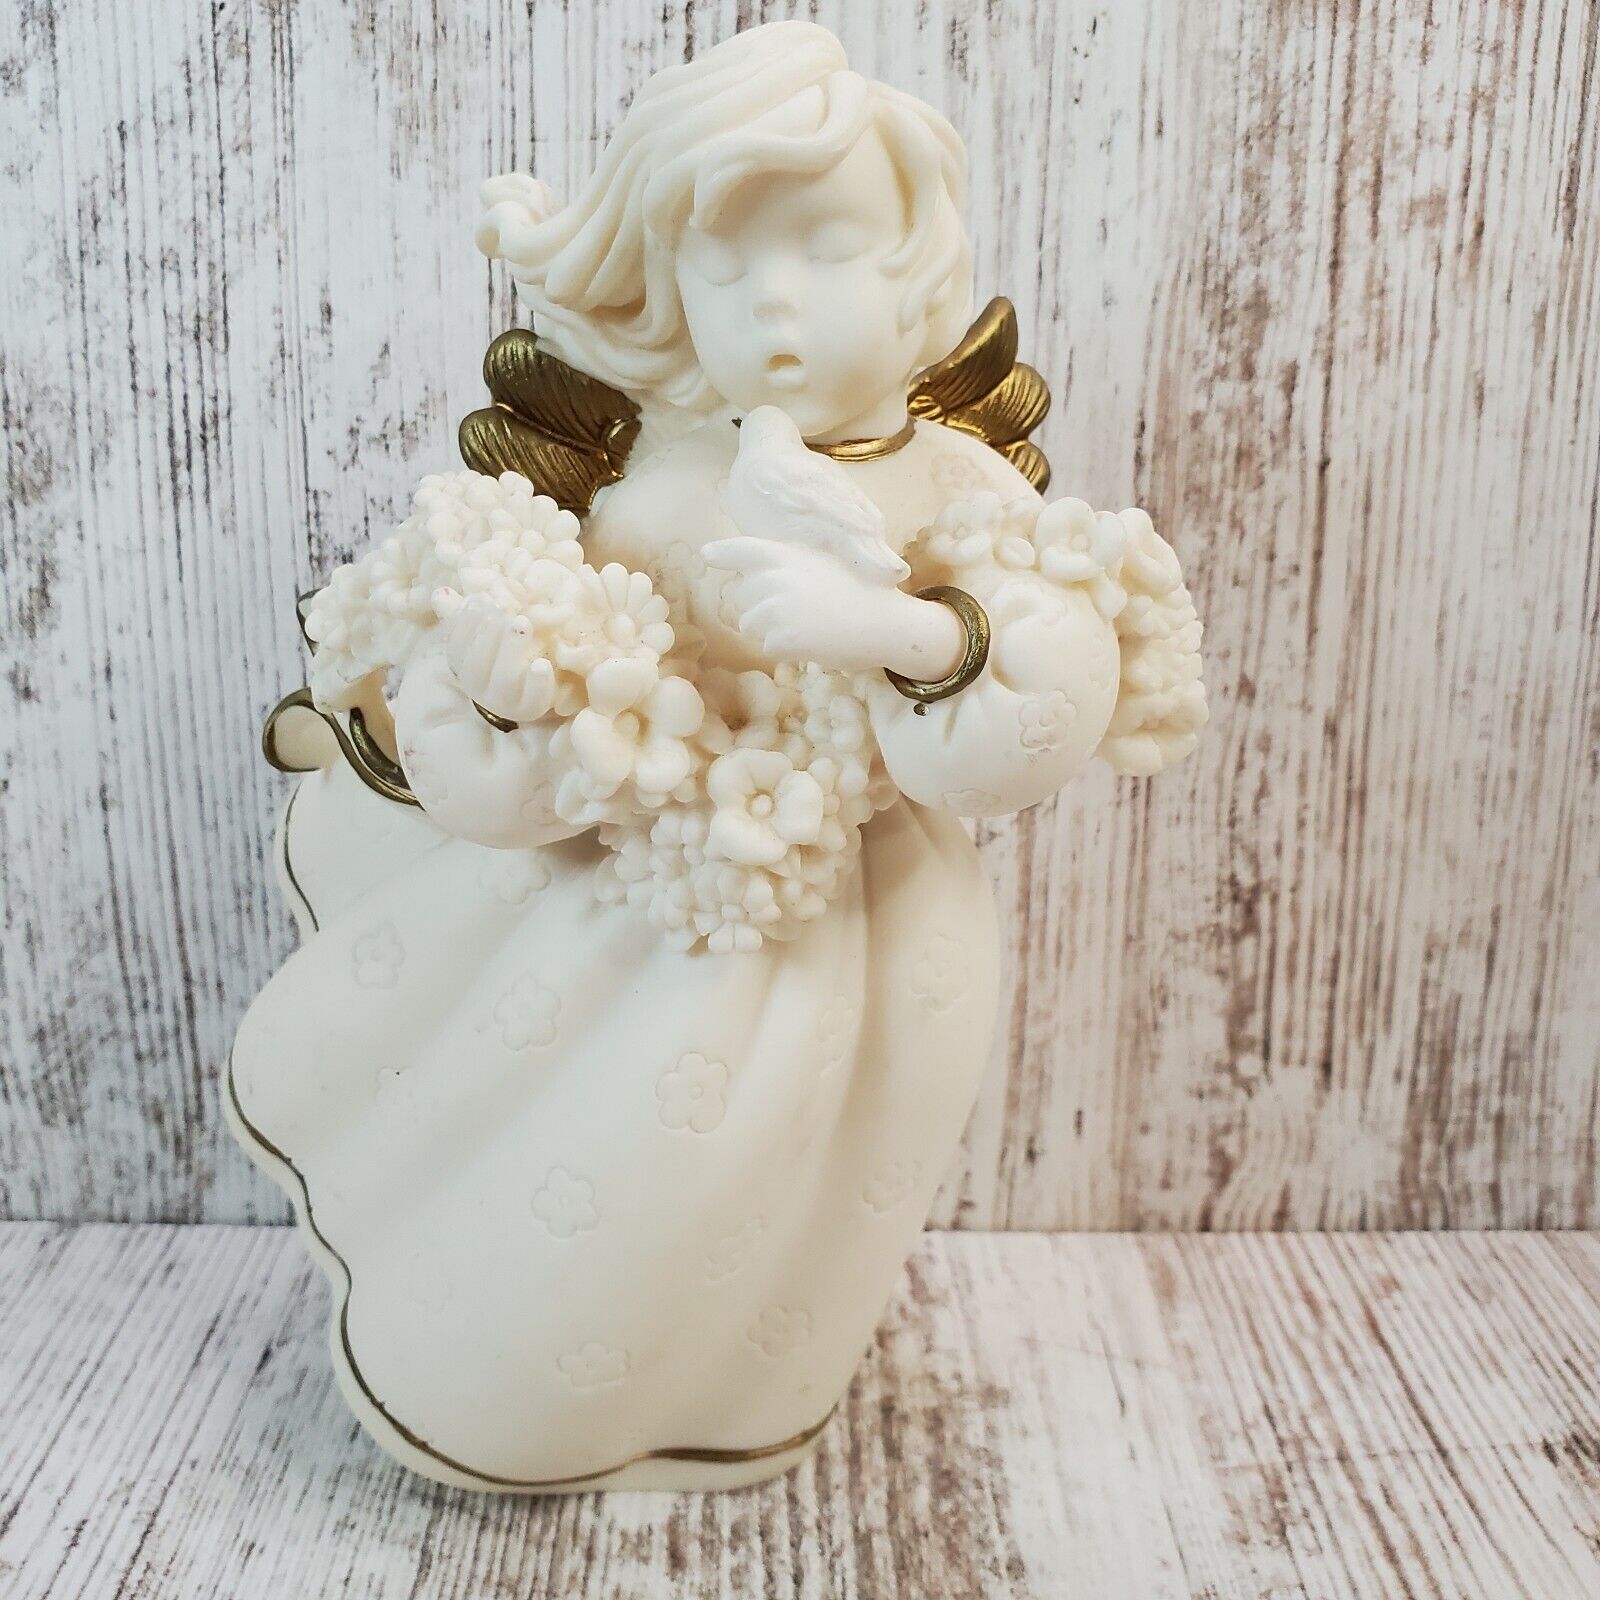 Vintage Windsong Angel by Roman Figurine 85779  Angel Holding Bird and Flowers